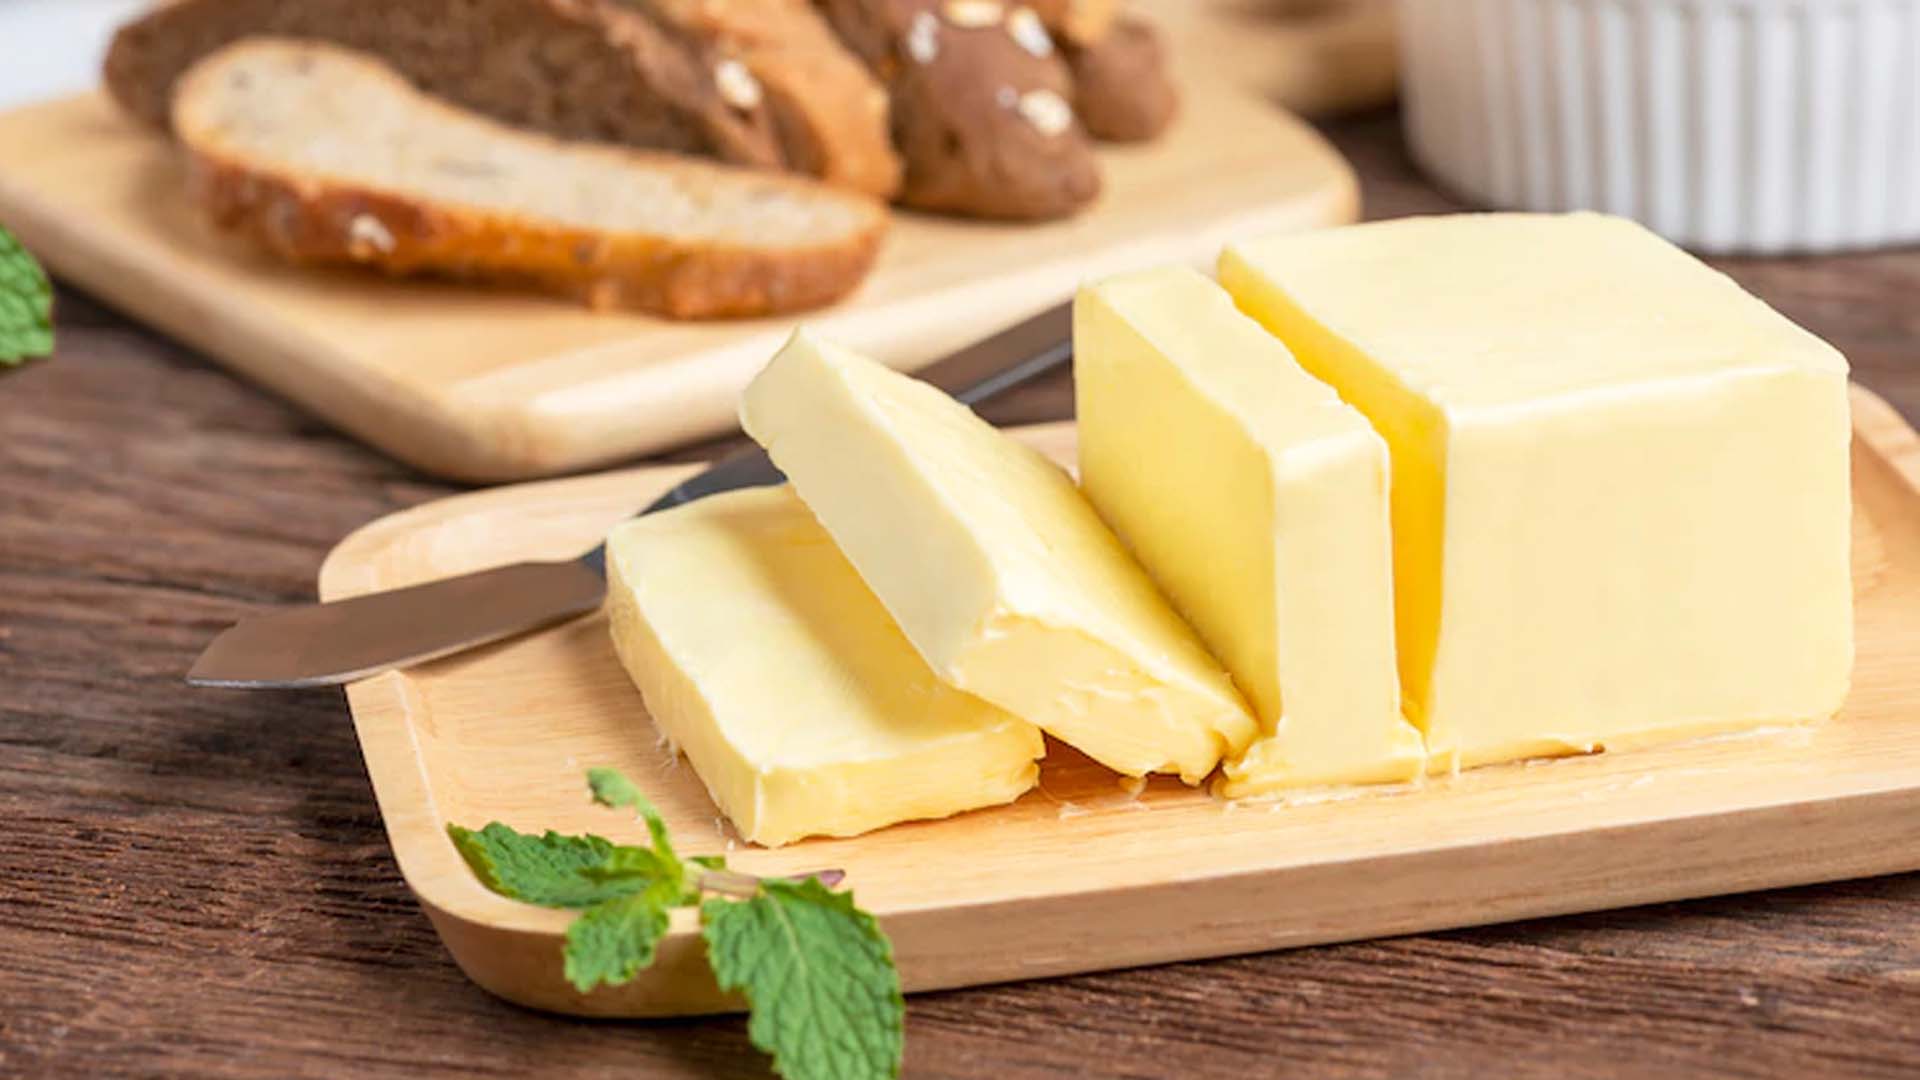 Nutritional Facts of Butter